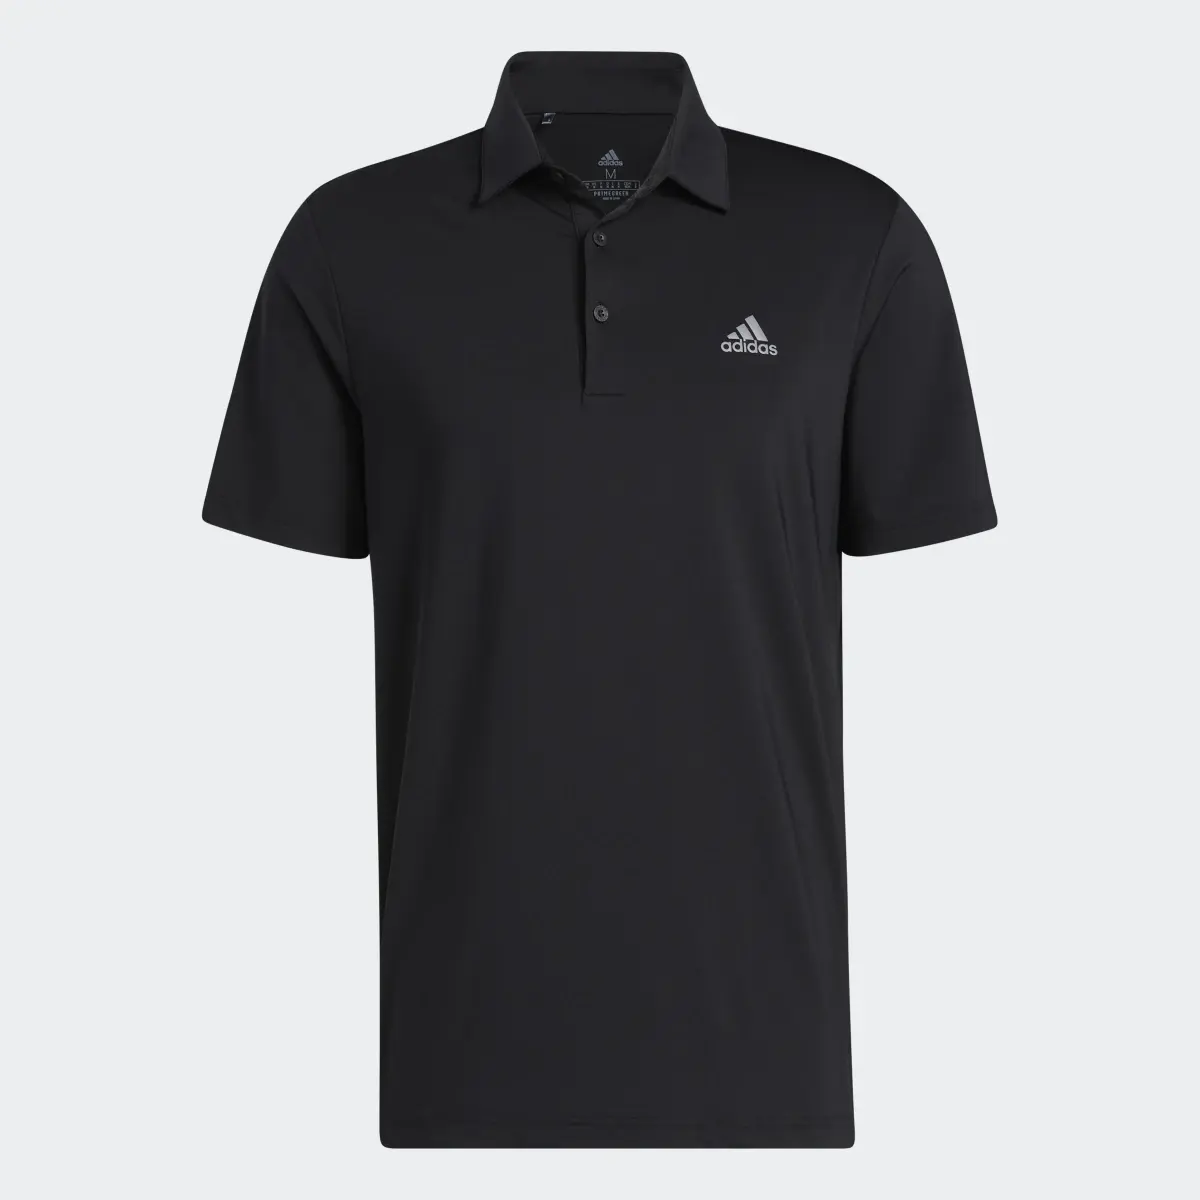 Adidas Ultimate365 Solid Left Chest Polo Shirt. 1